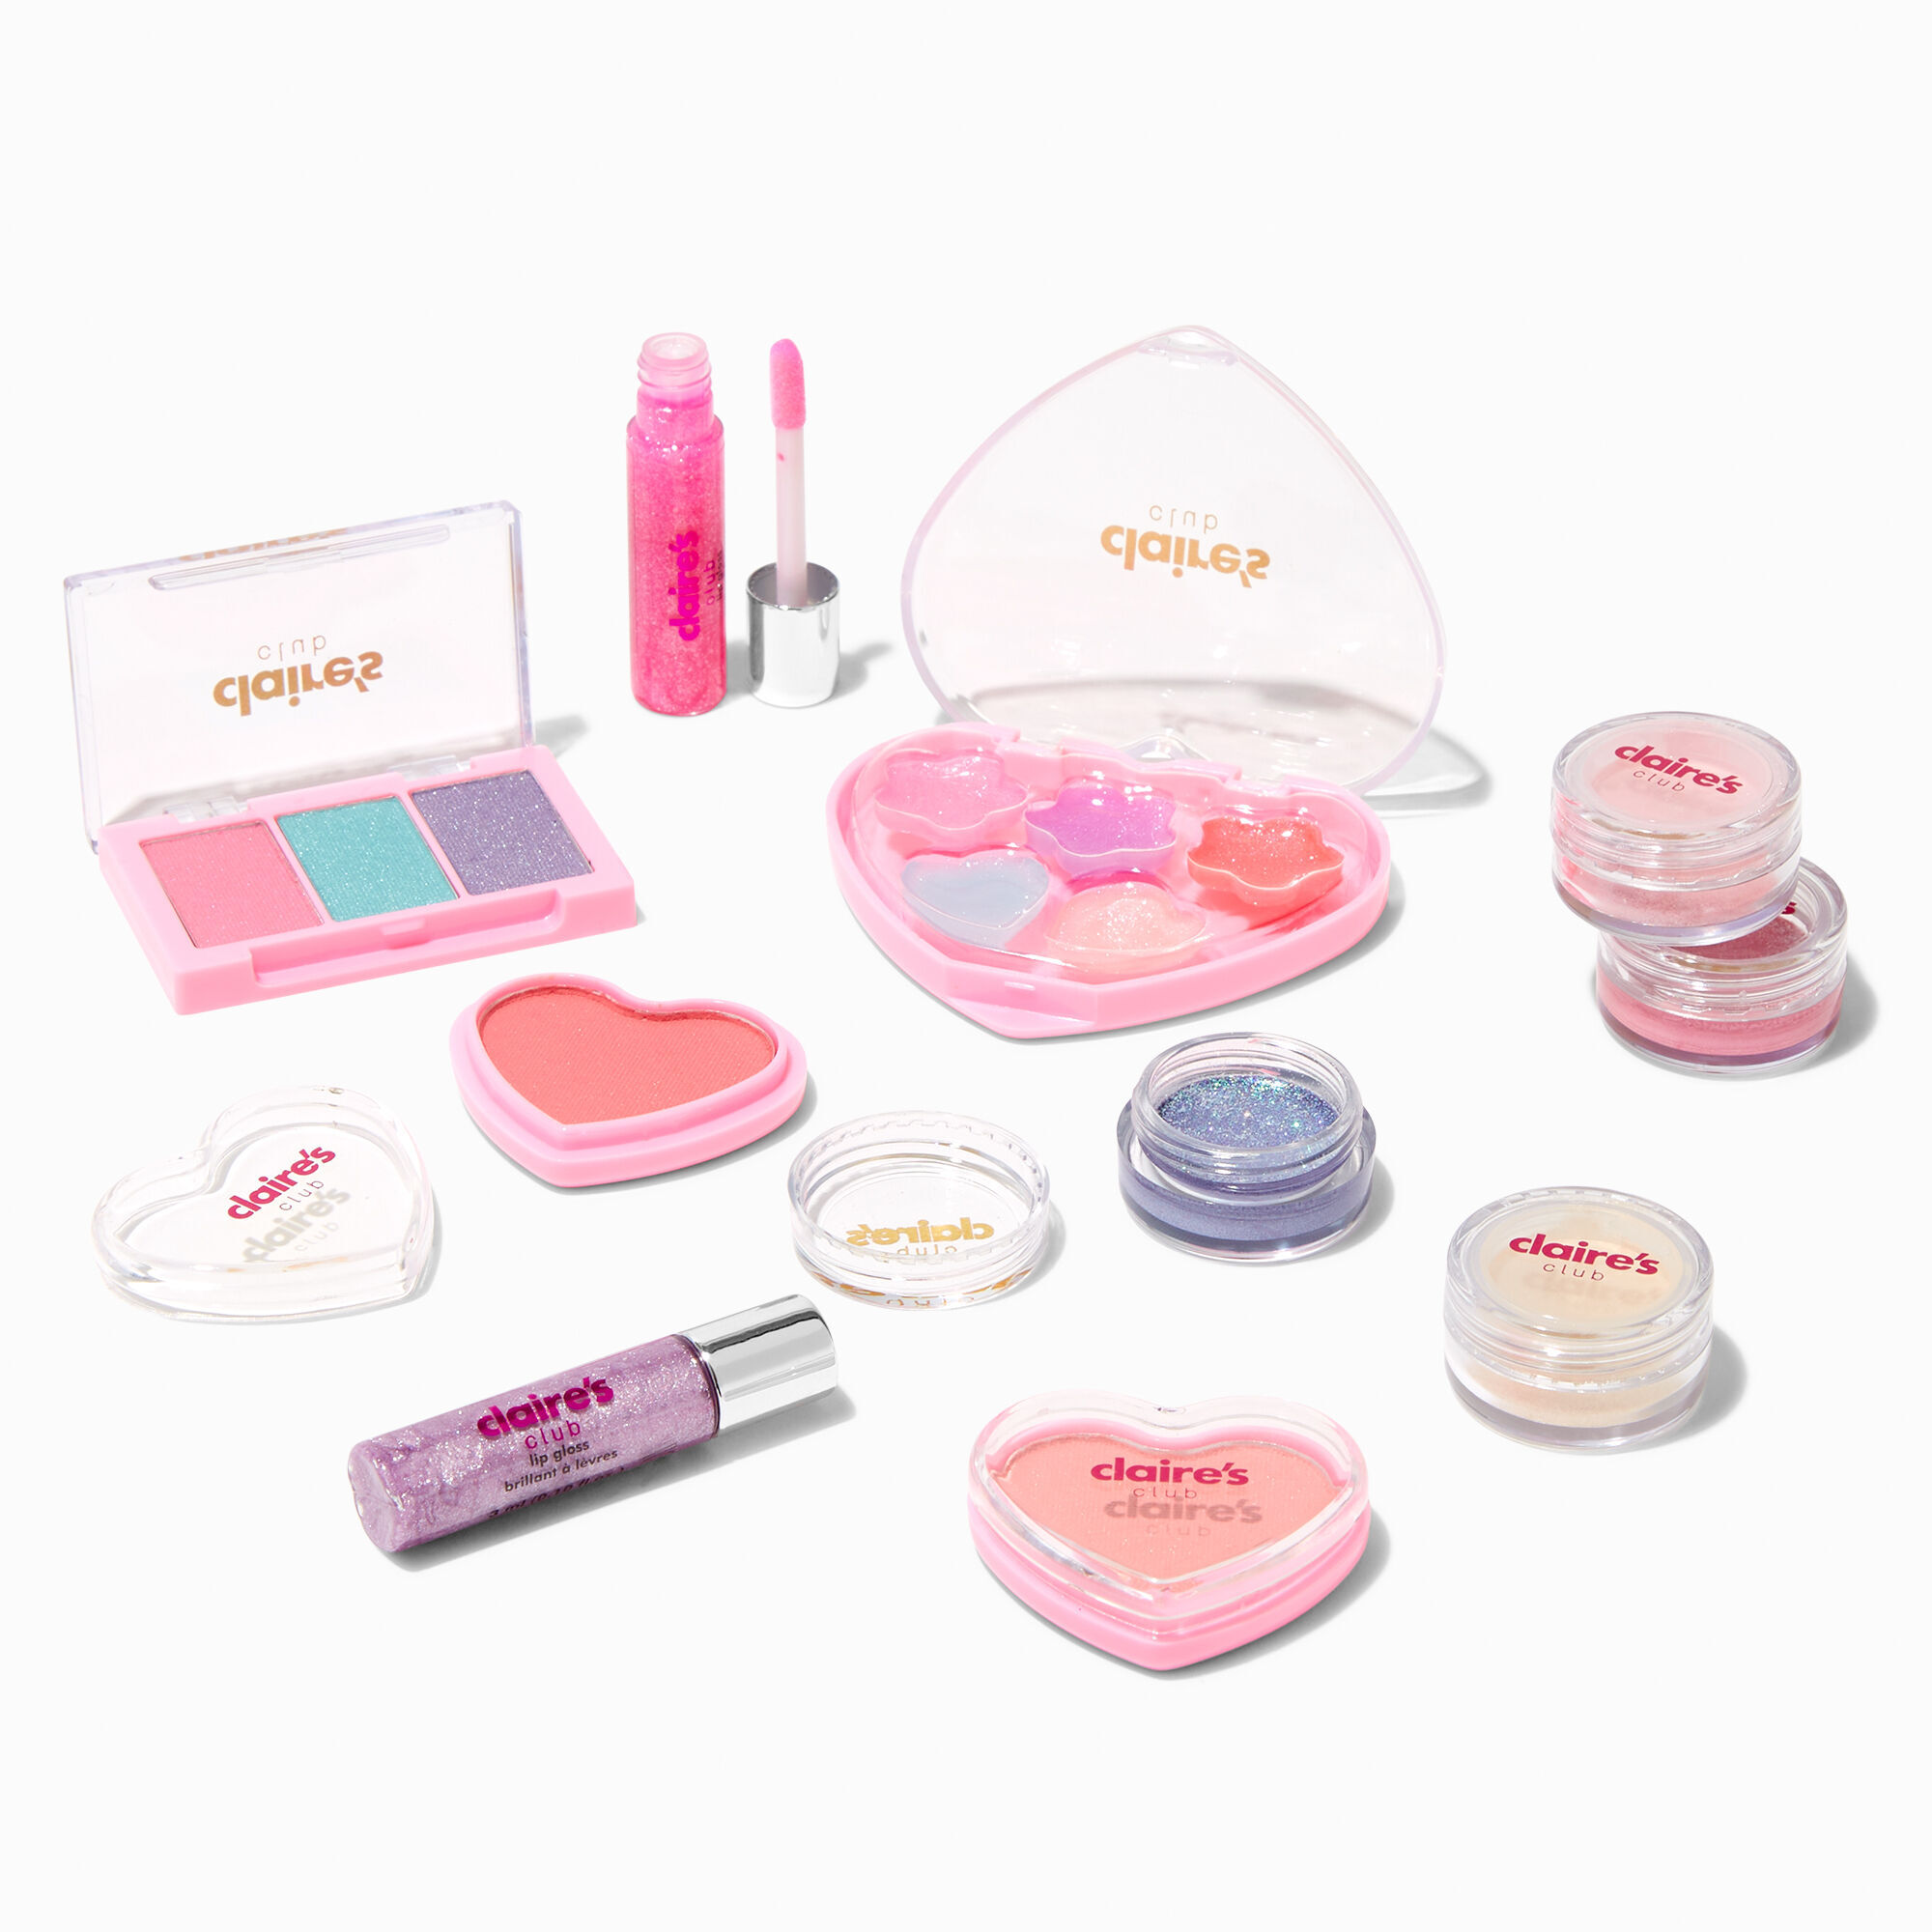 View Claires Club Assorted Makeup Set 10 Pack information